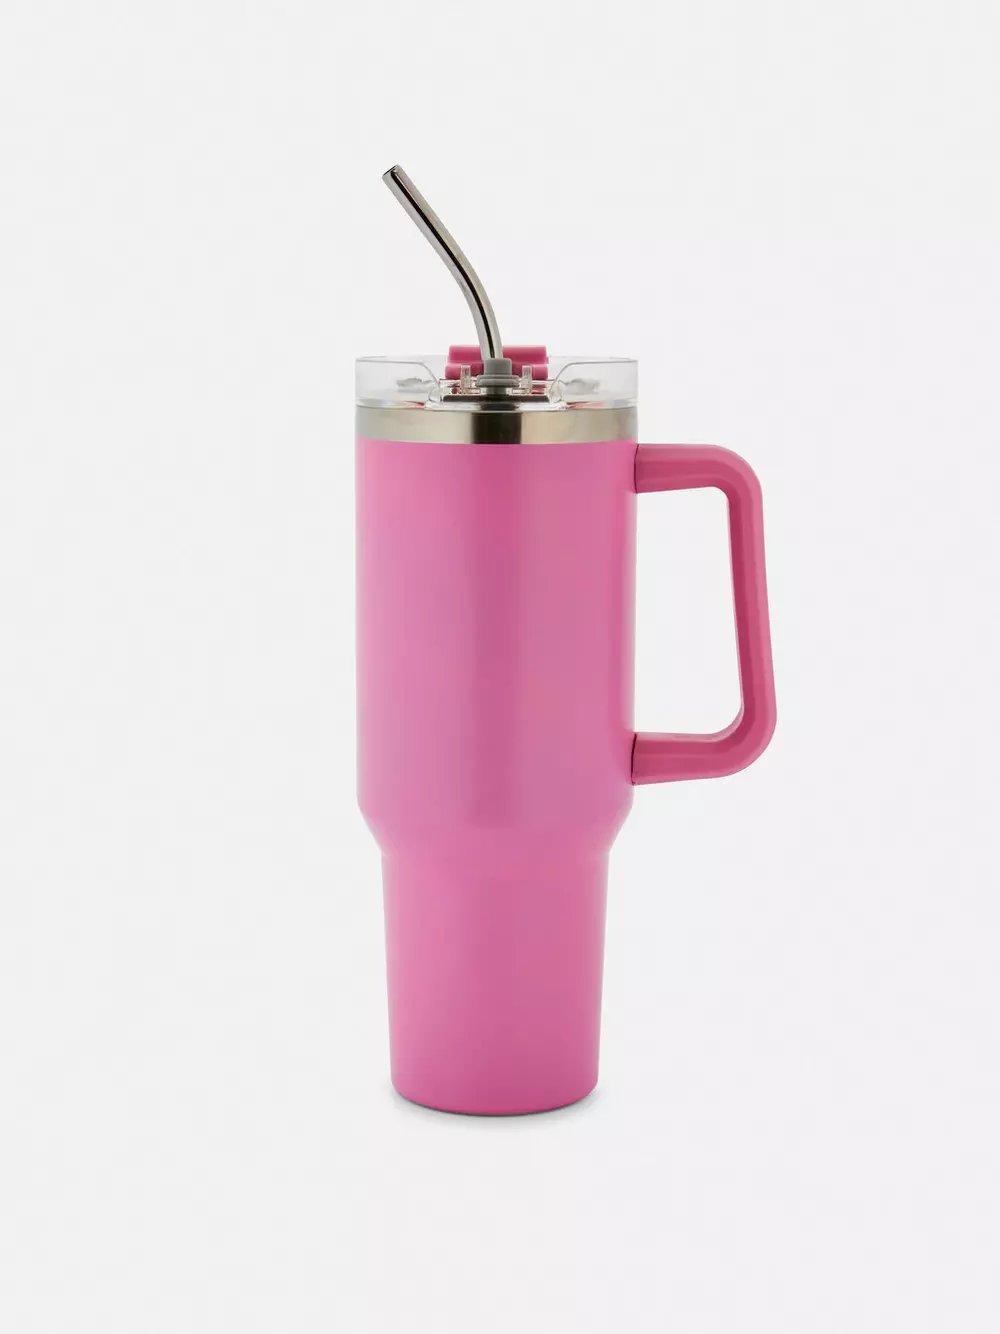 You can get a similar travel cup at Primark, £10